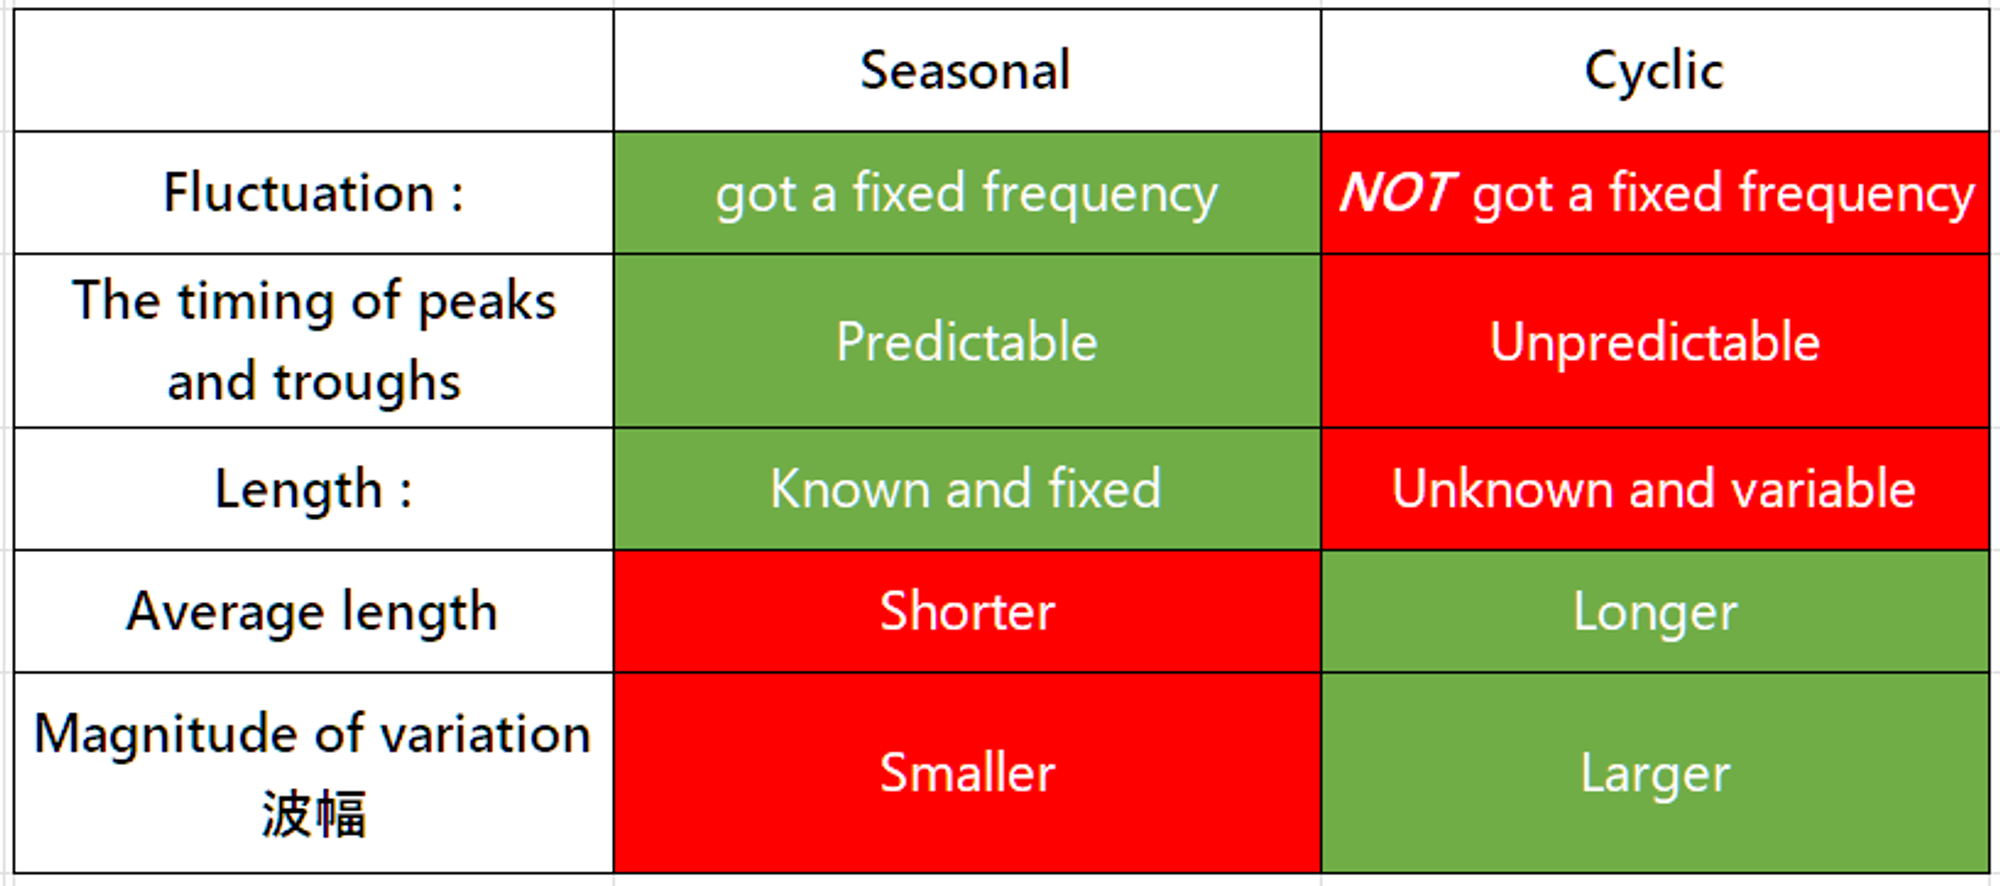 Many people get confused about Seasonal and Cyclic. Here are the difference.